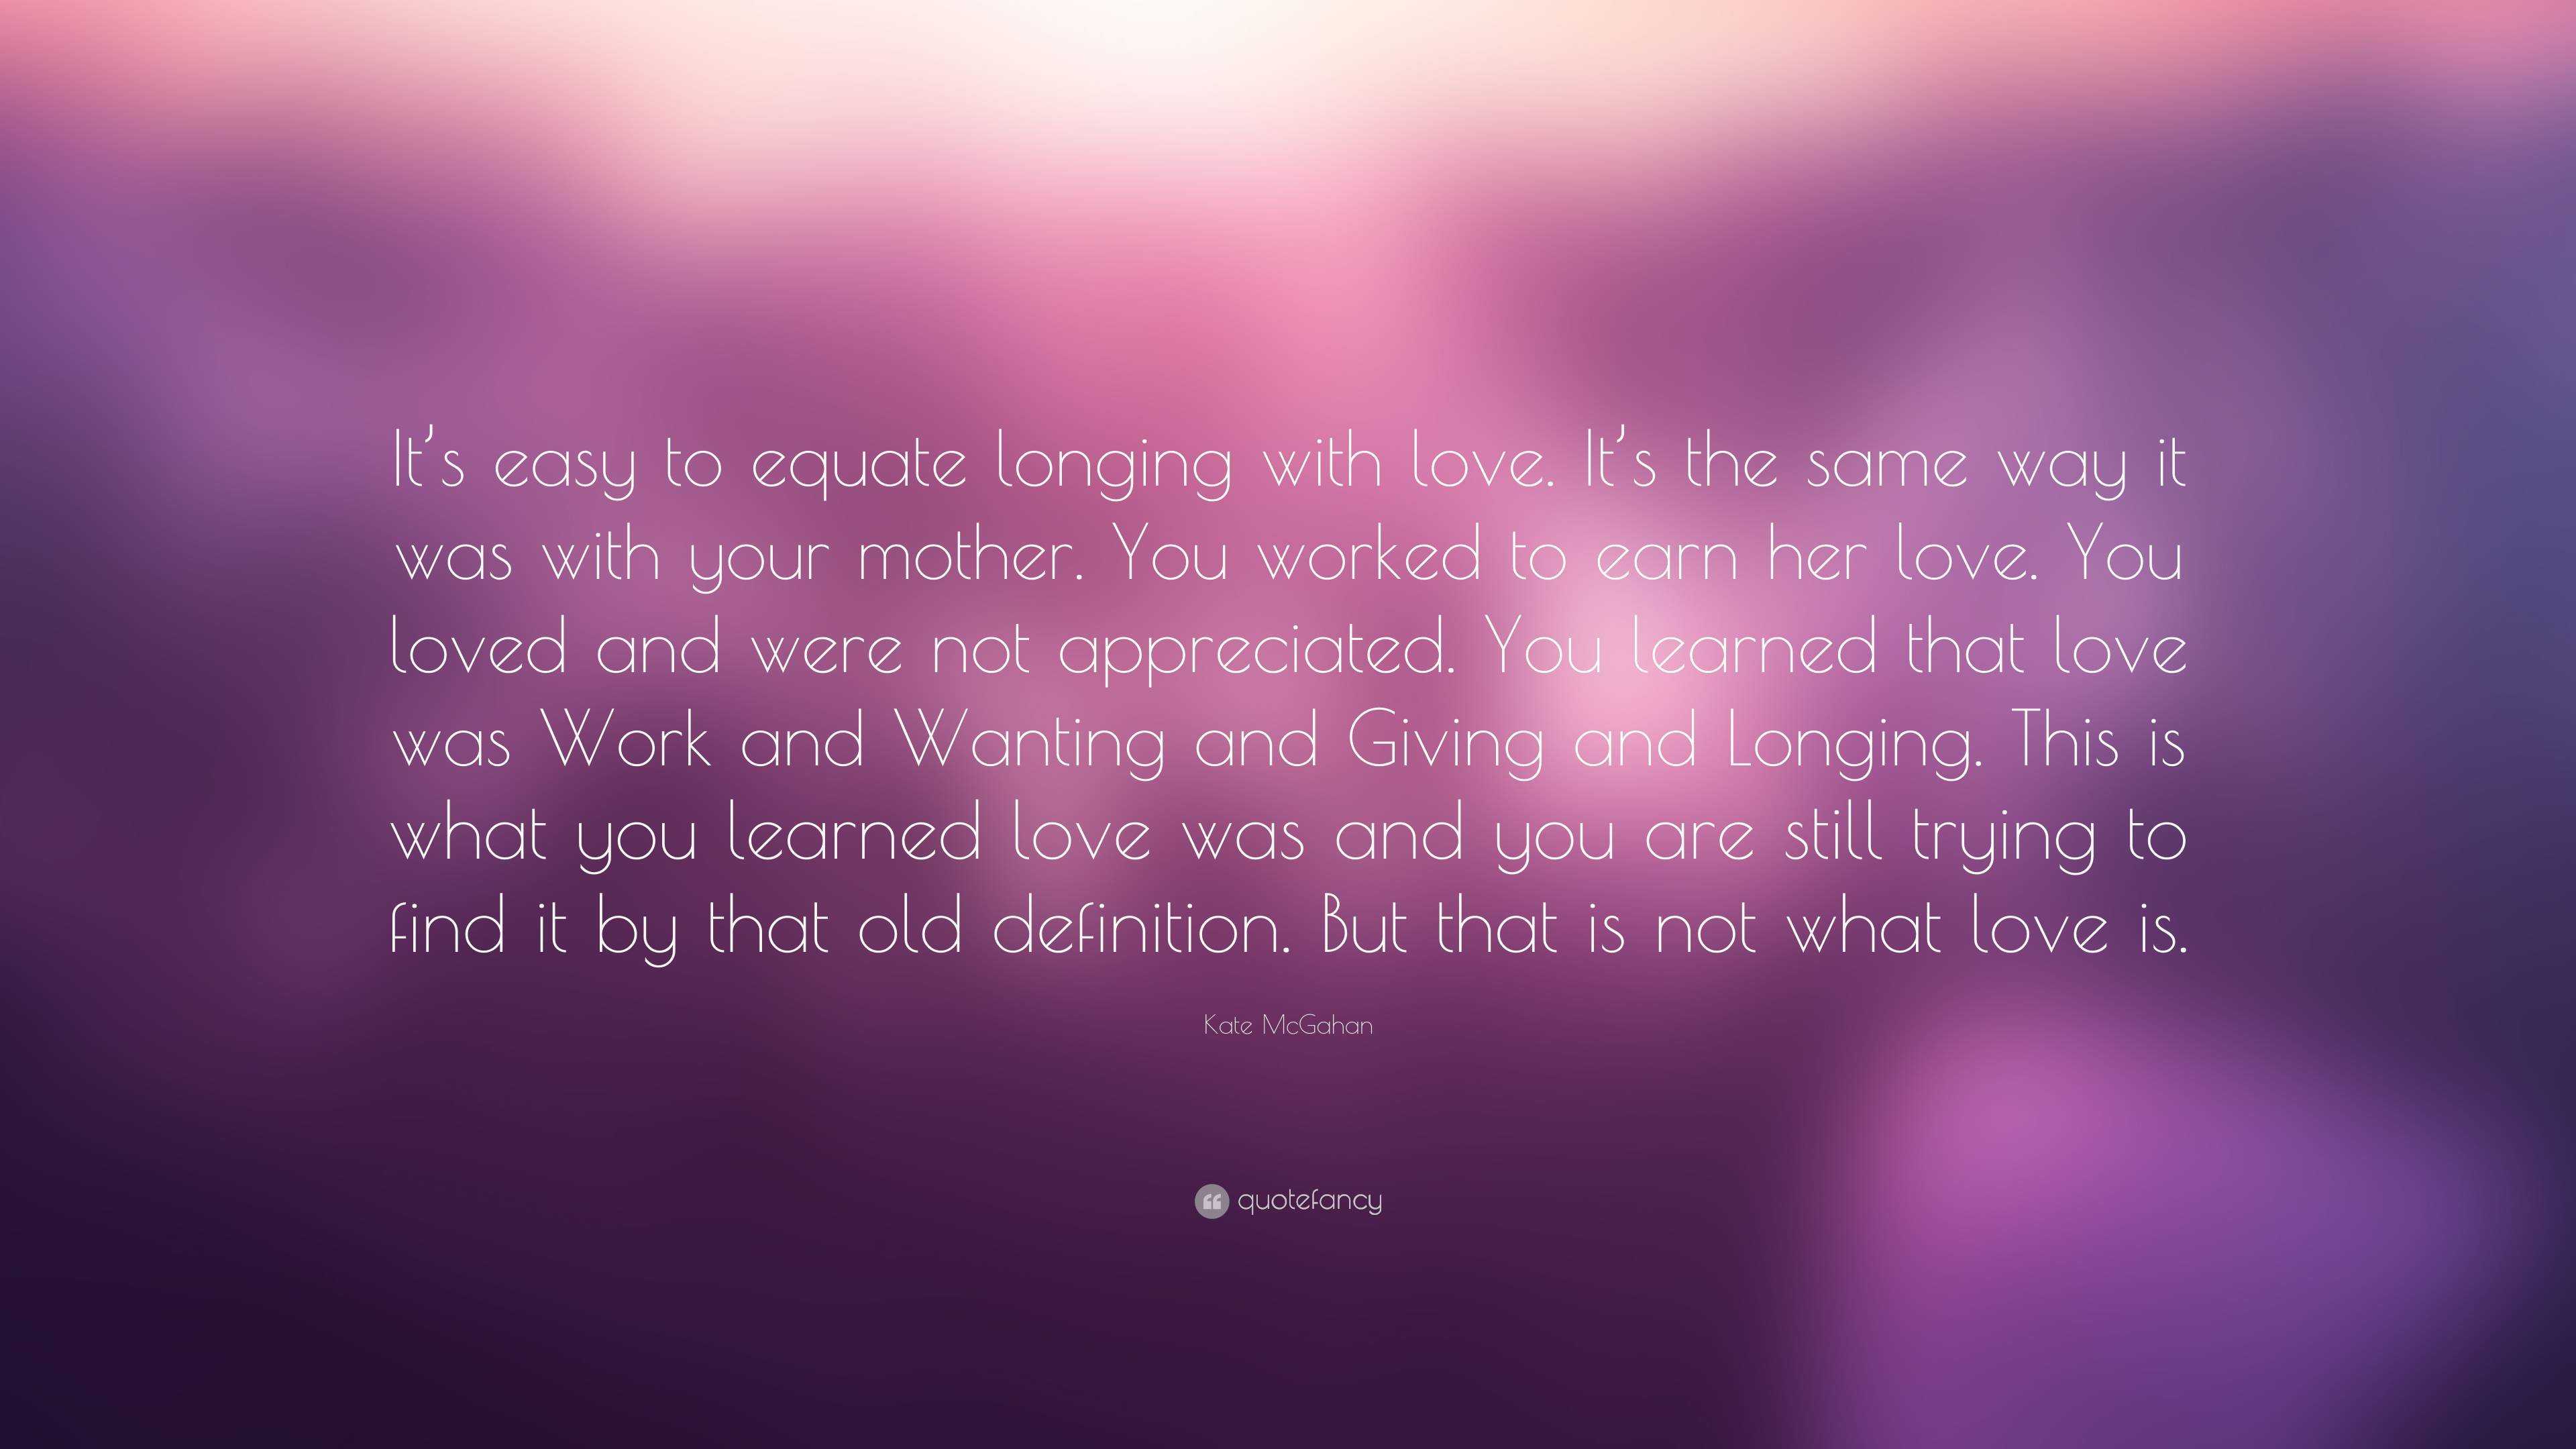 Kate McGahan Quote: “It’s easy to equate longing with love. It’s the ...